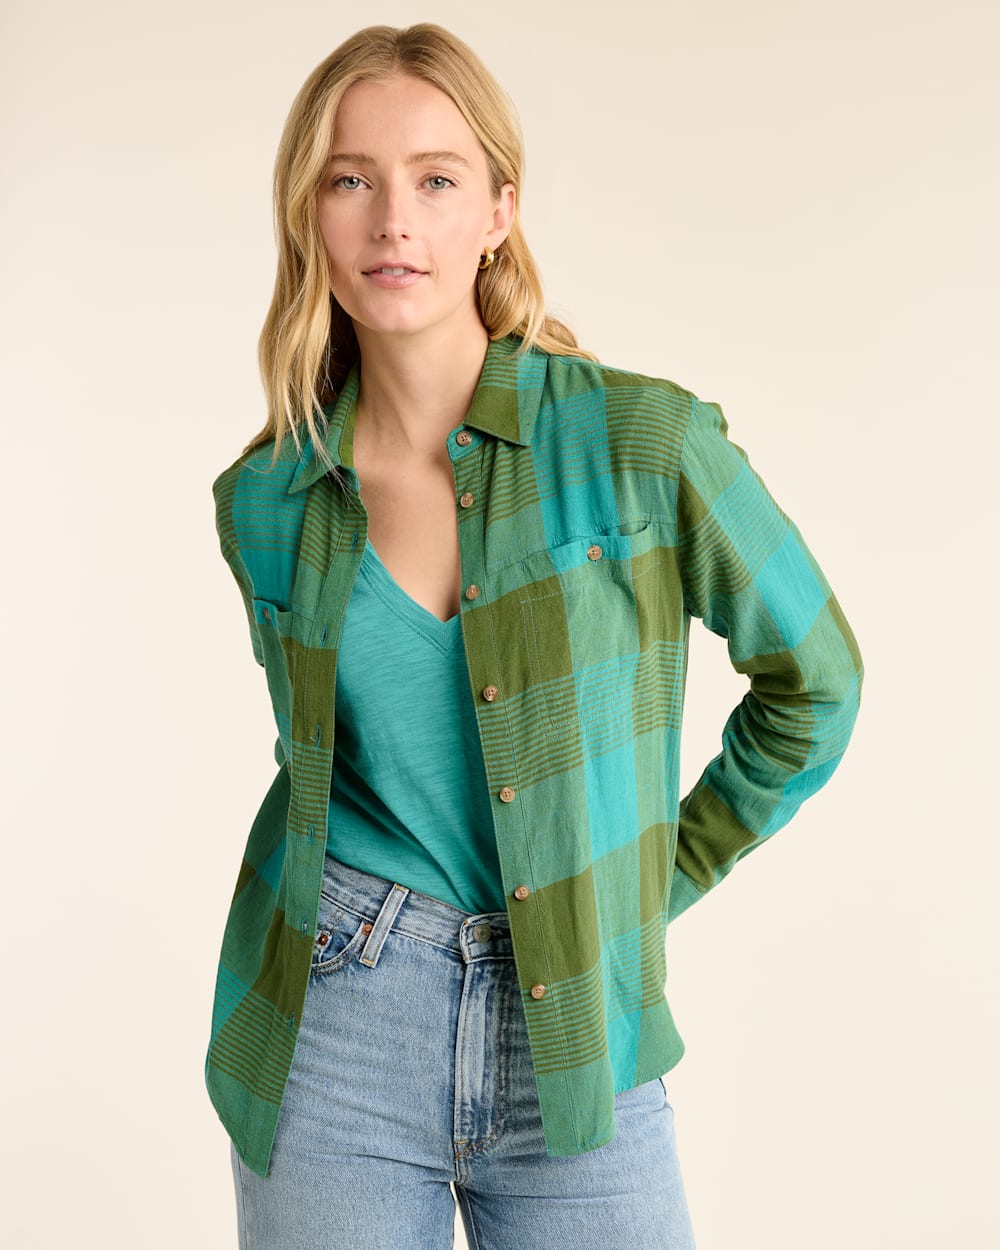 ALTERNATE VIEW OF WOMEN'S ADLEY LINEN-BLEND SHIRT IN TEAL/GREEN CHECK image number 4